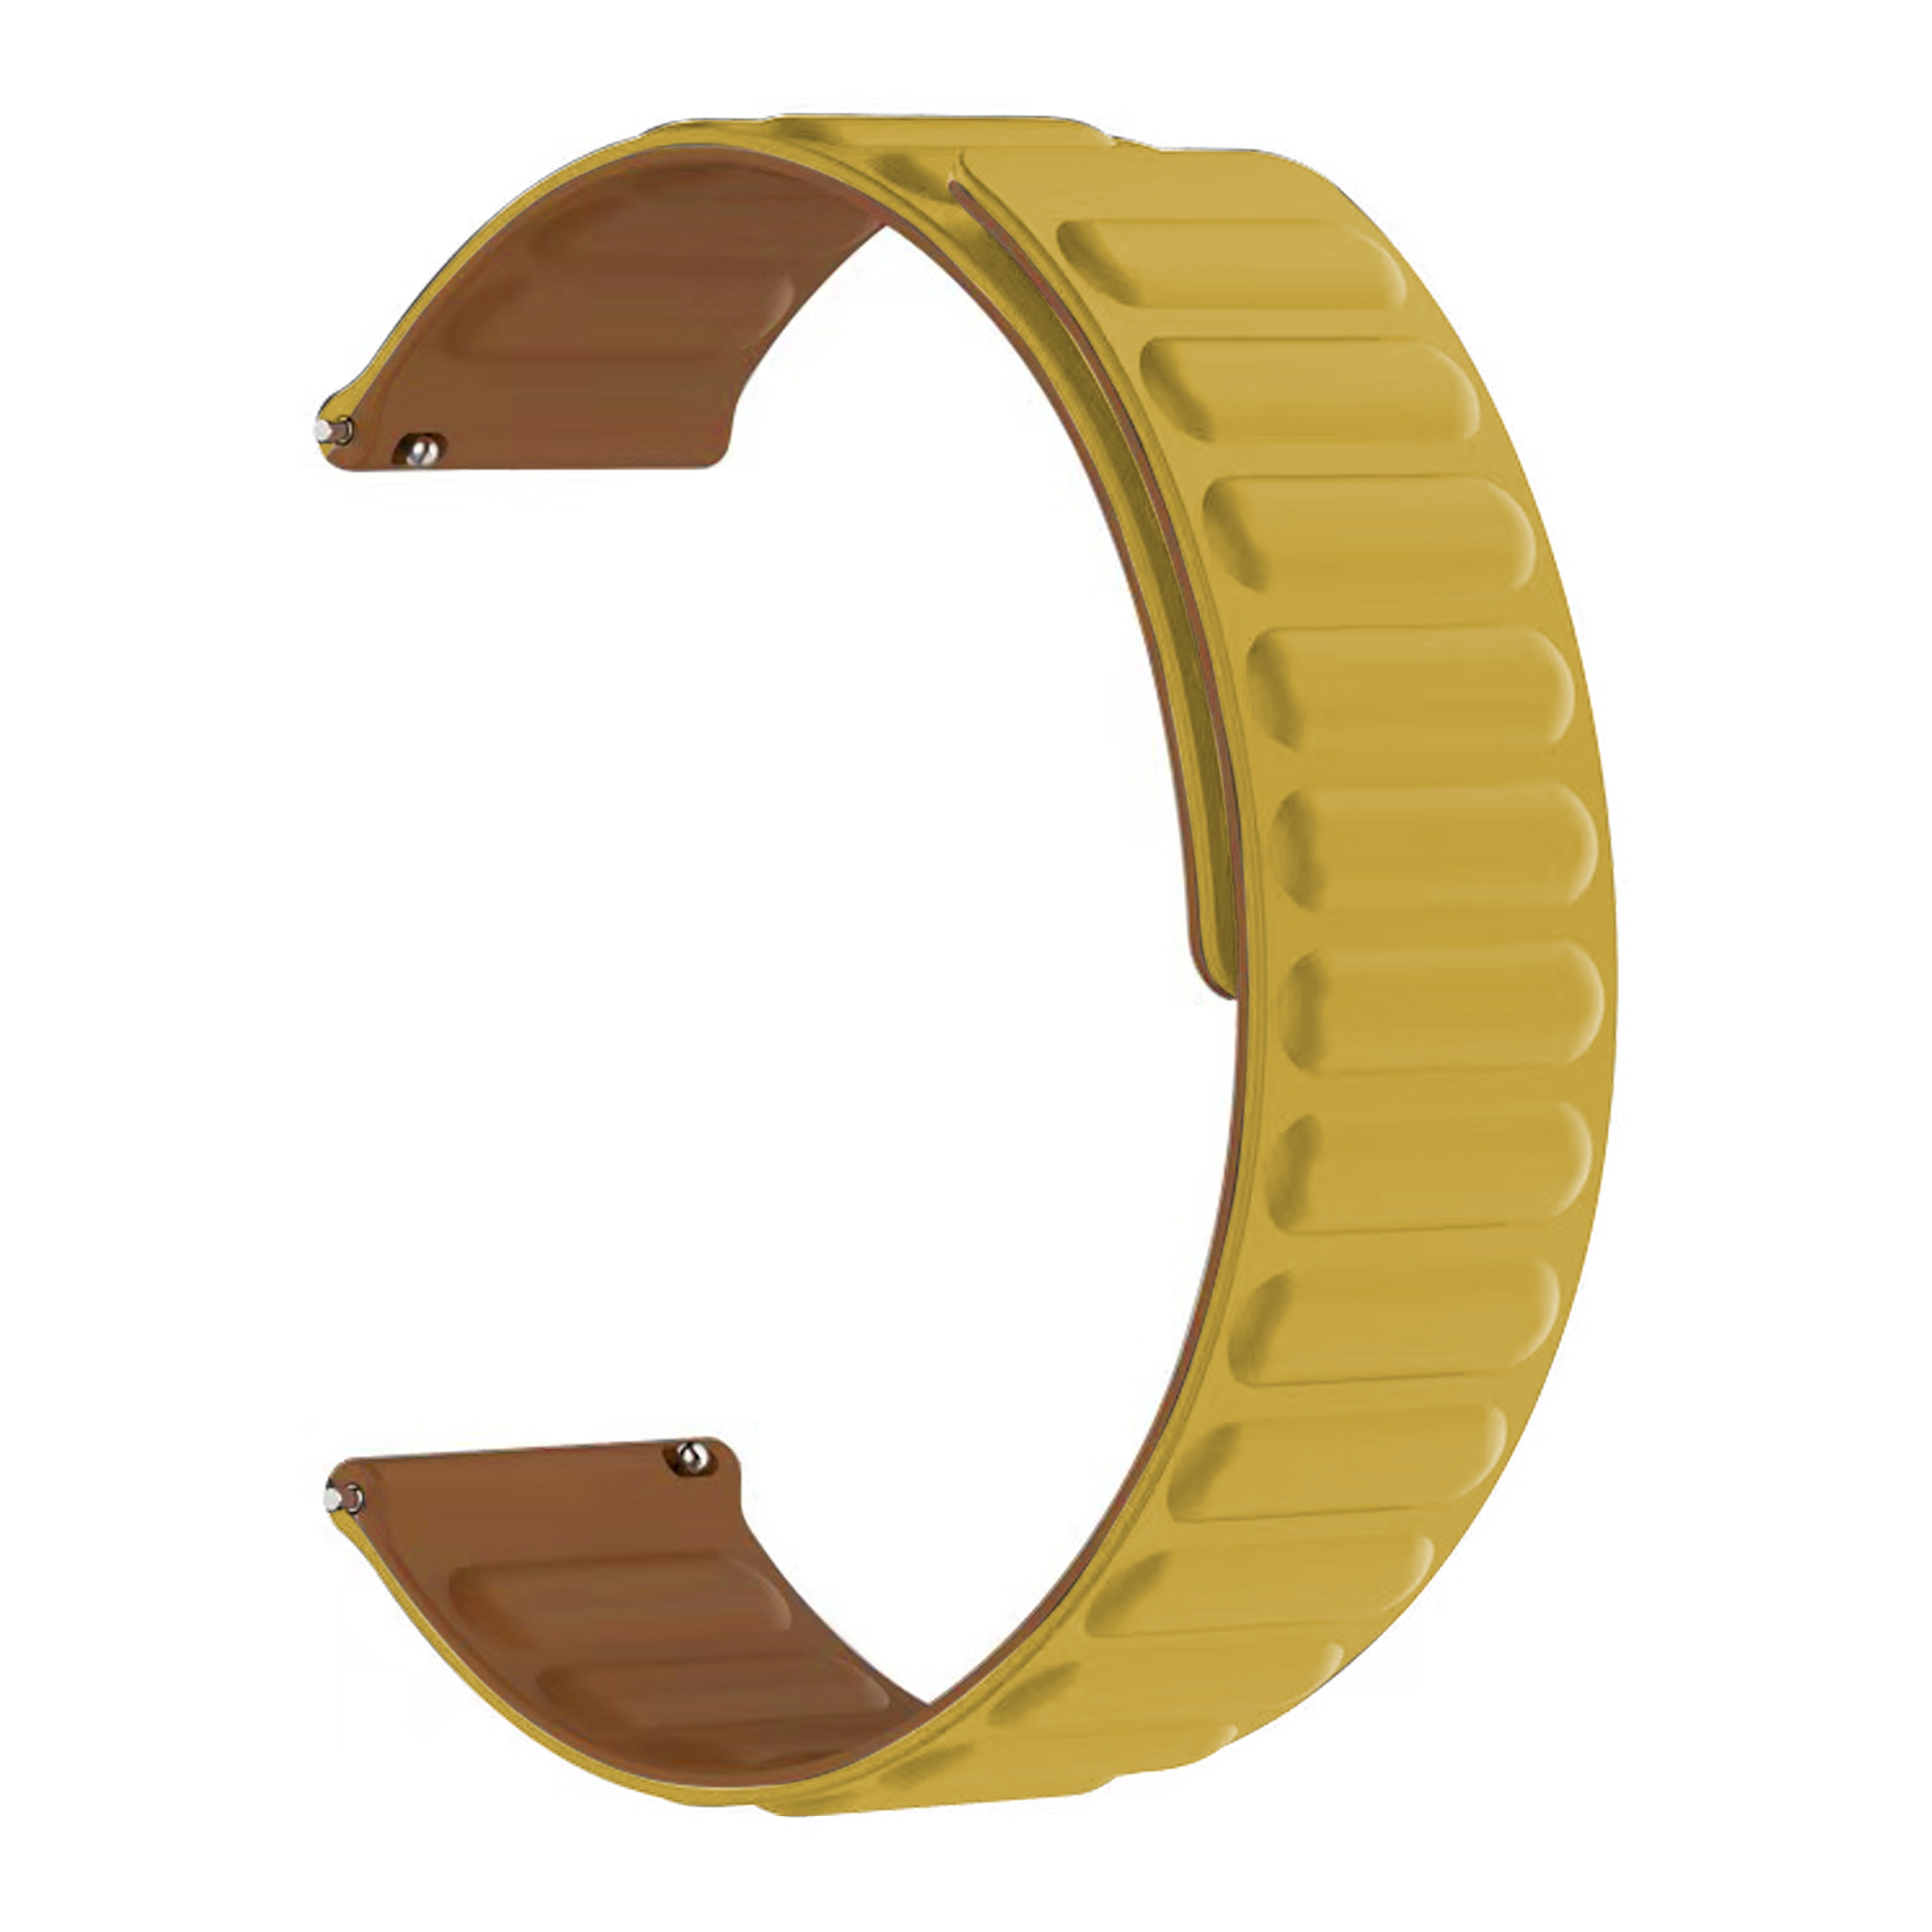 Mibro Watch A2 Magnetic Silicone Band Yellow